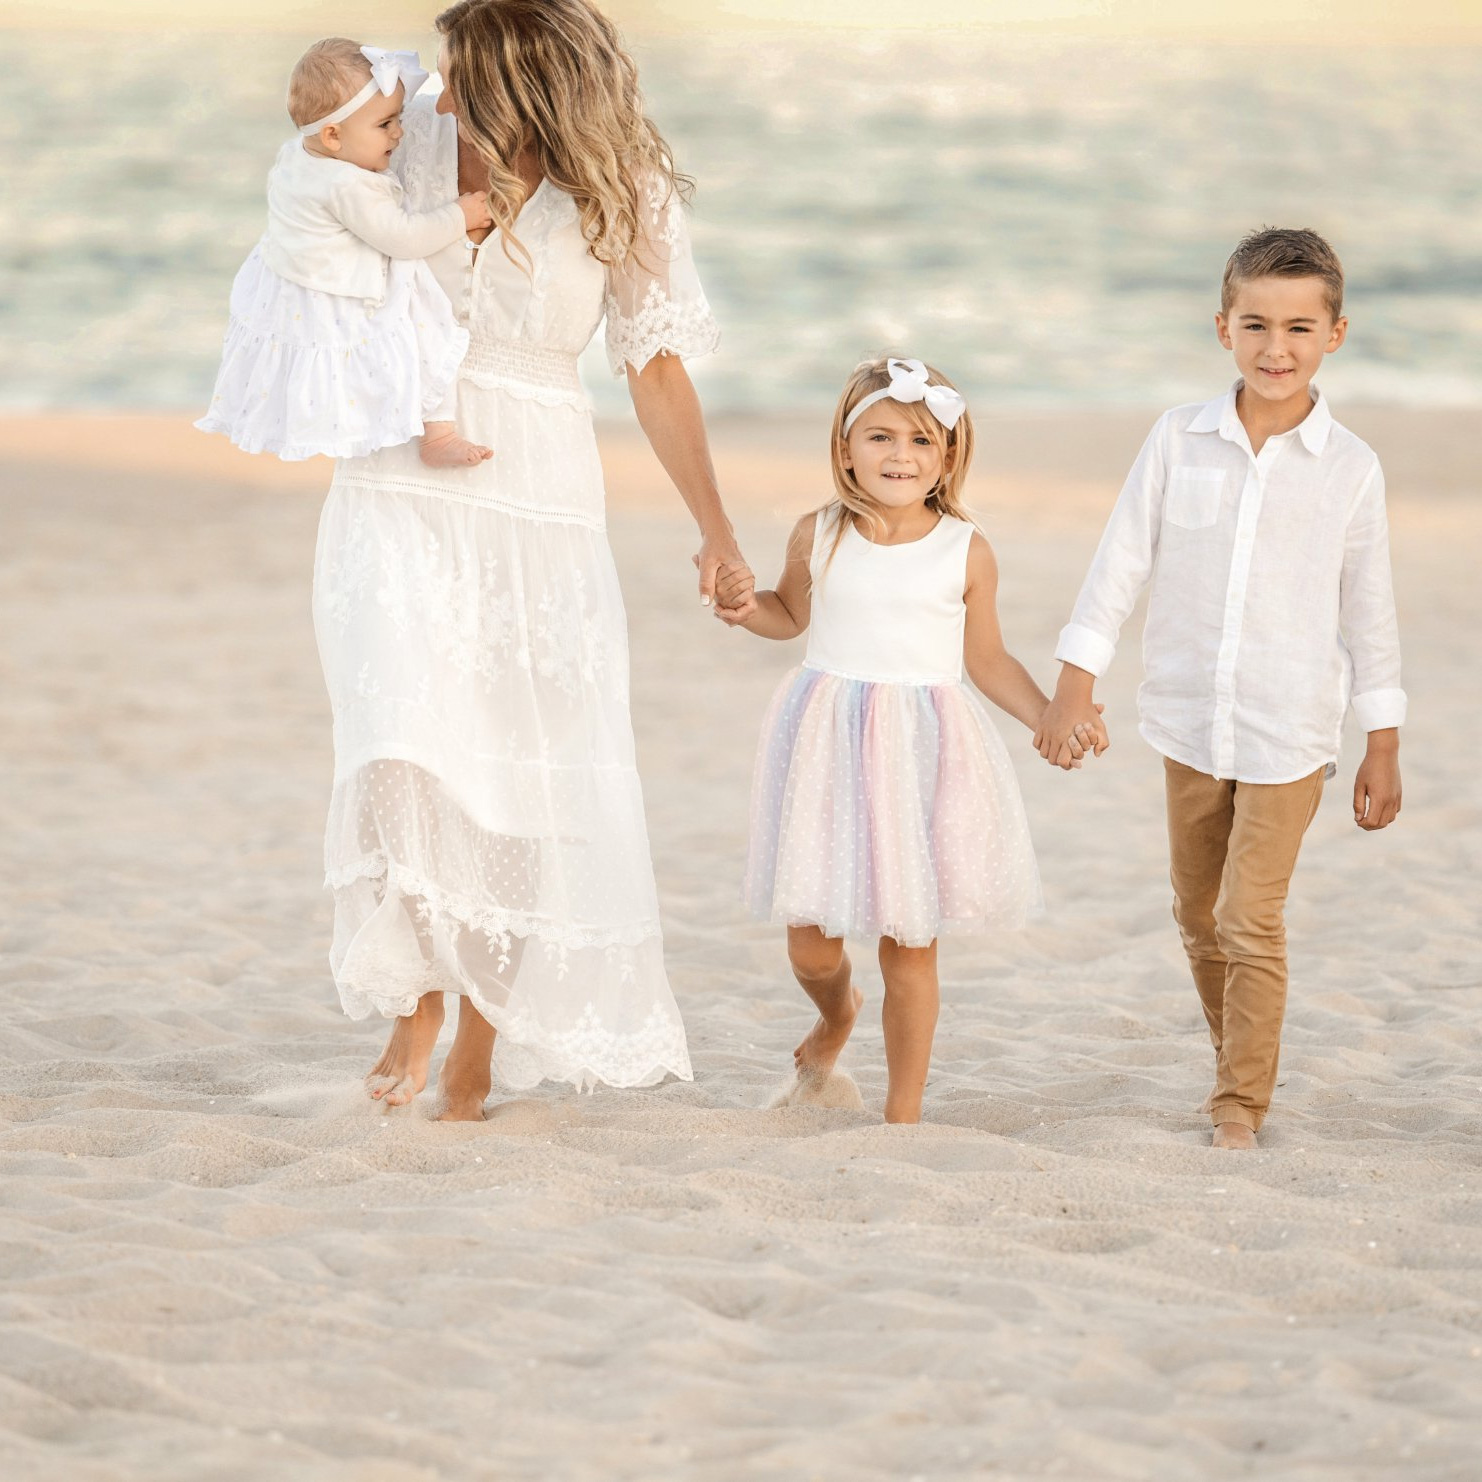 Dr. Kimberly on the beach with her three young children leading a holistic health and nutrition lifestyle.